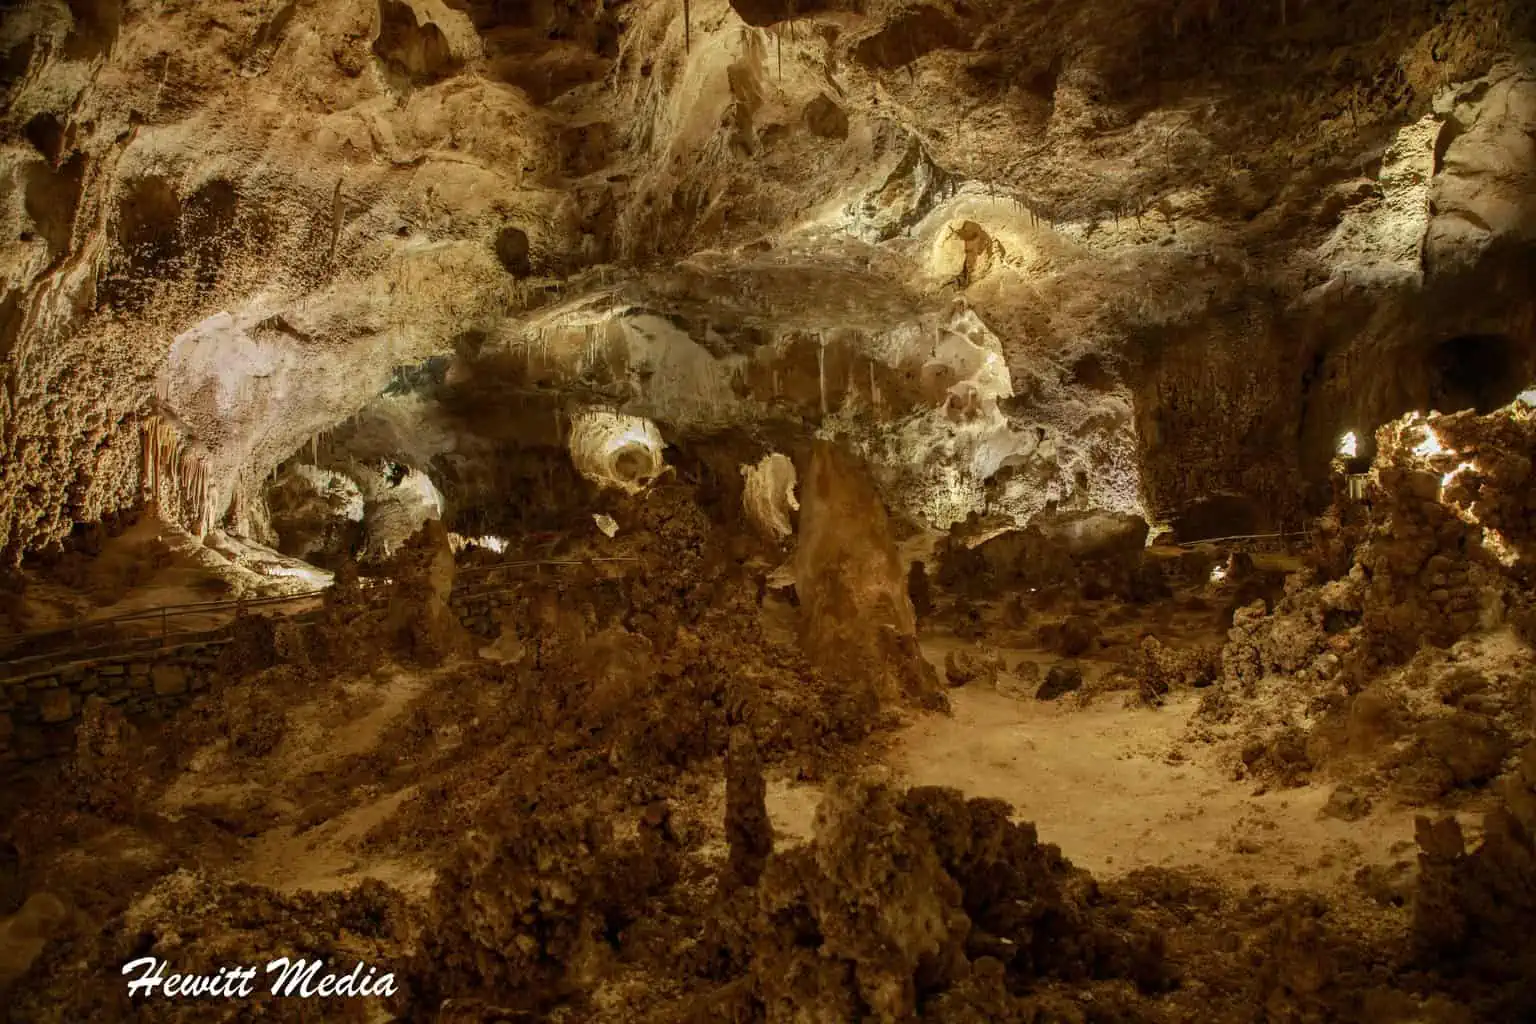 Taking Pictures in Low Light - Carlsbad Caverns